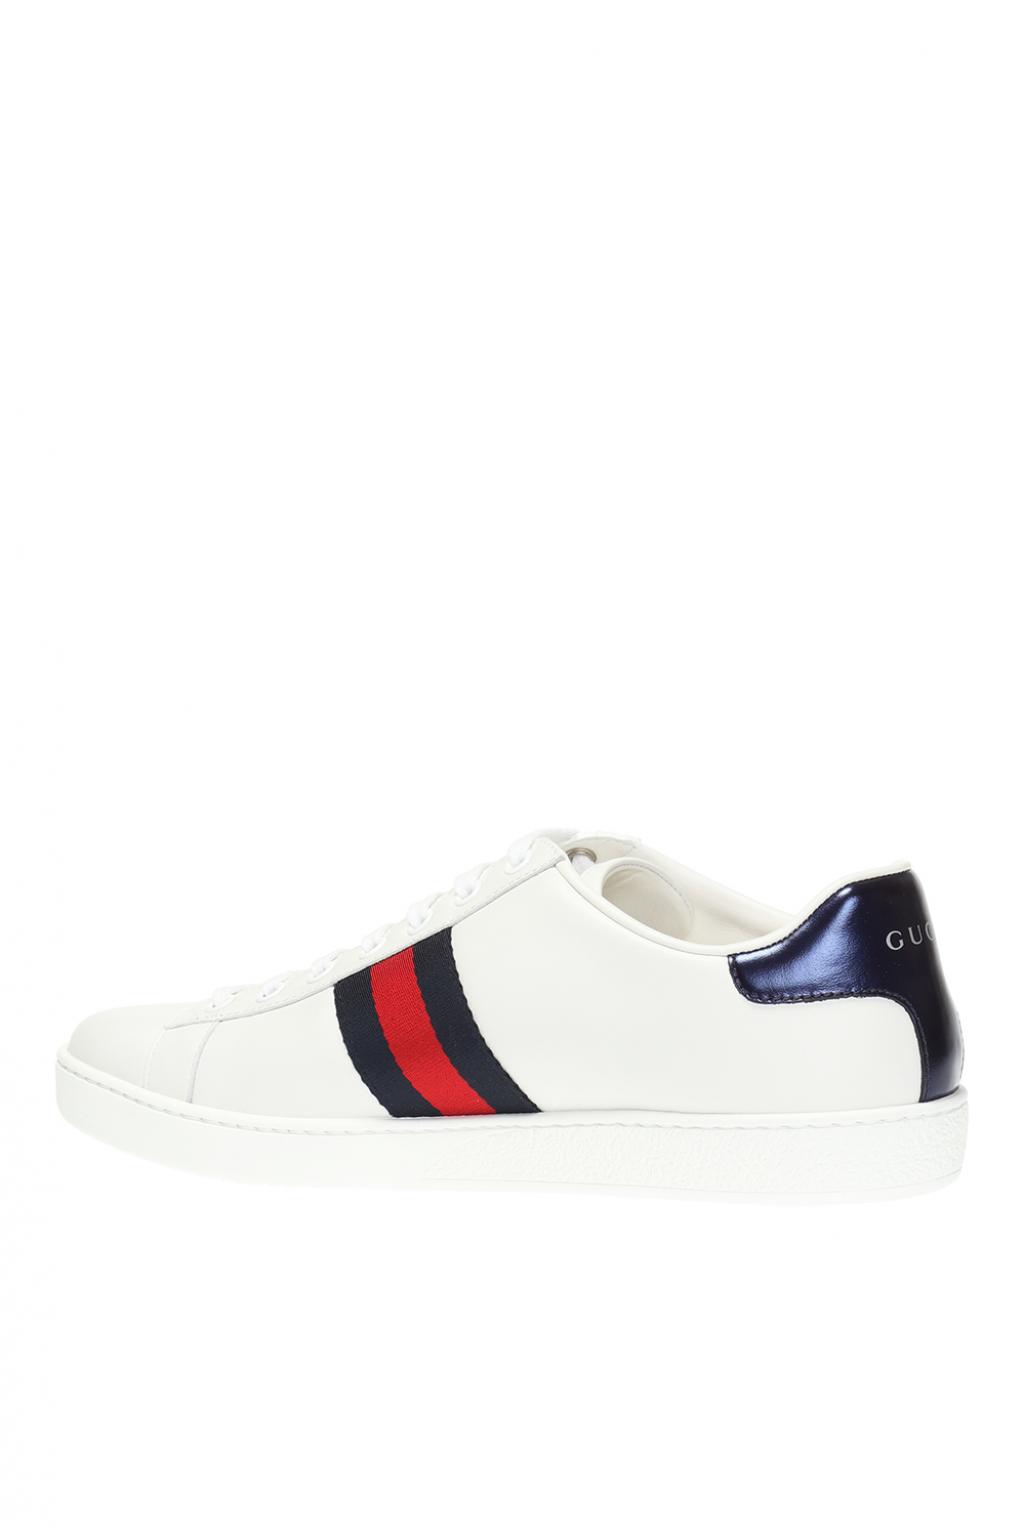 Gucci 'Ace' sneakers